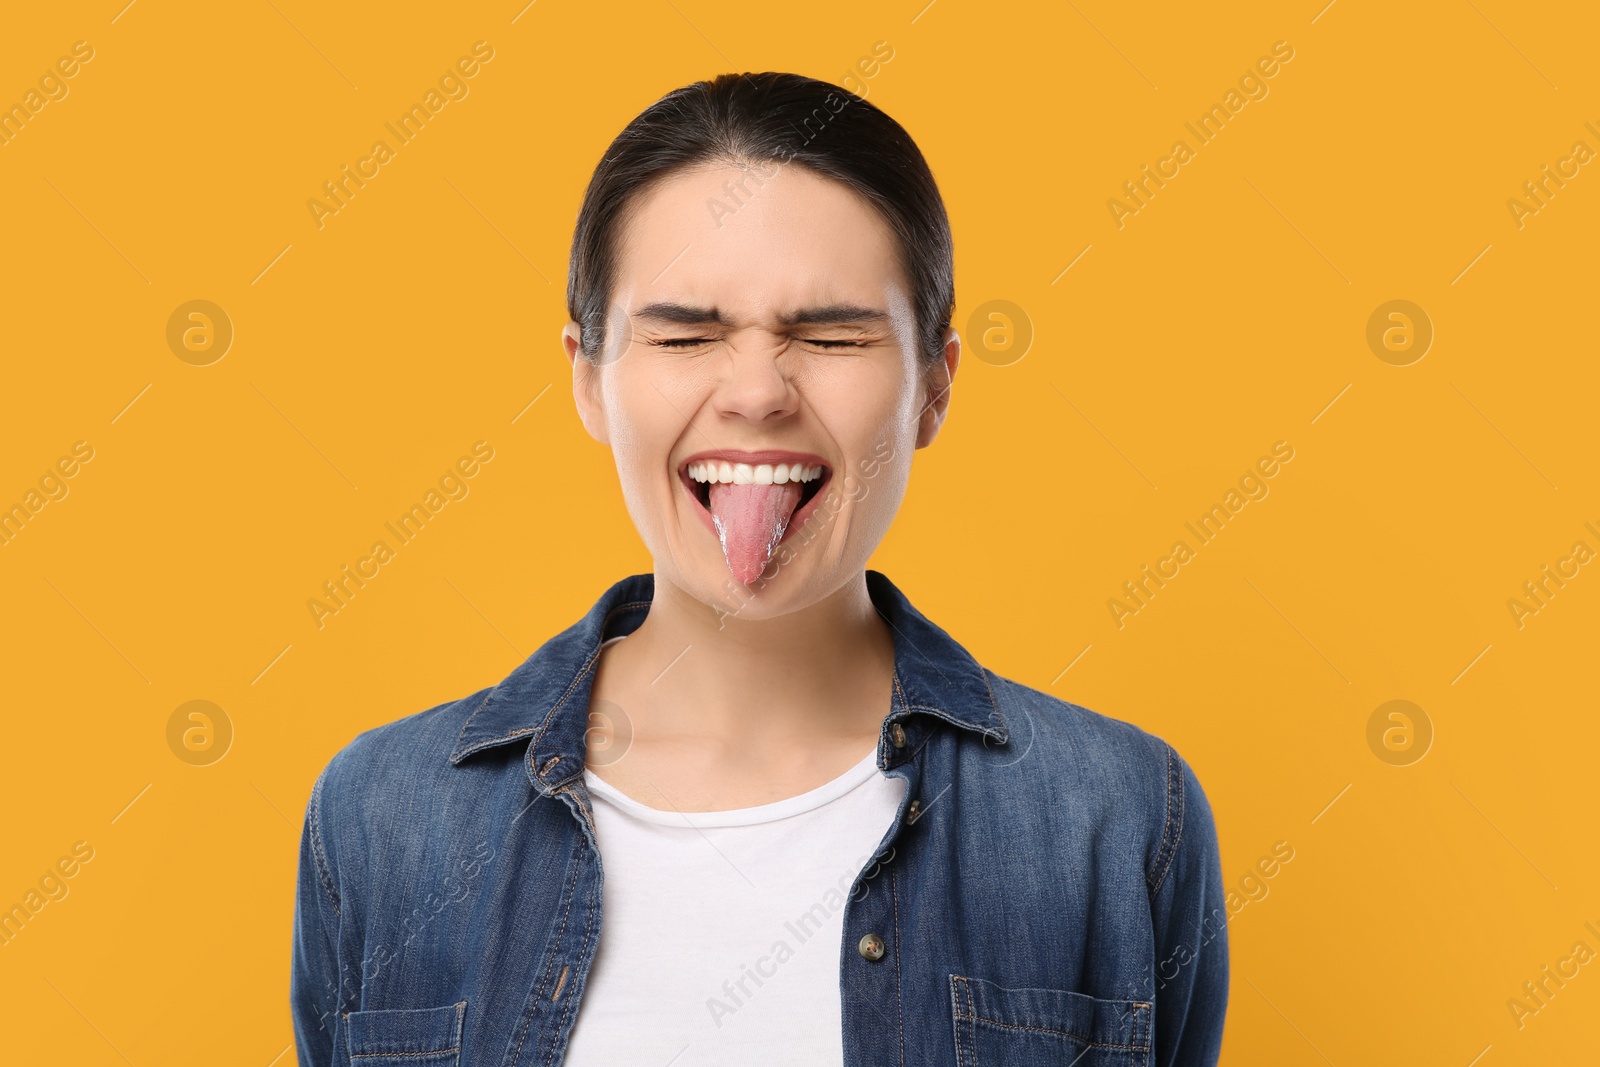 Photo of Happy young woman showing her tongue on yellow background